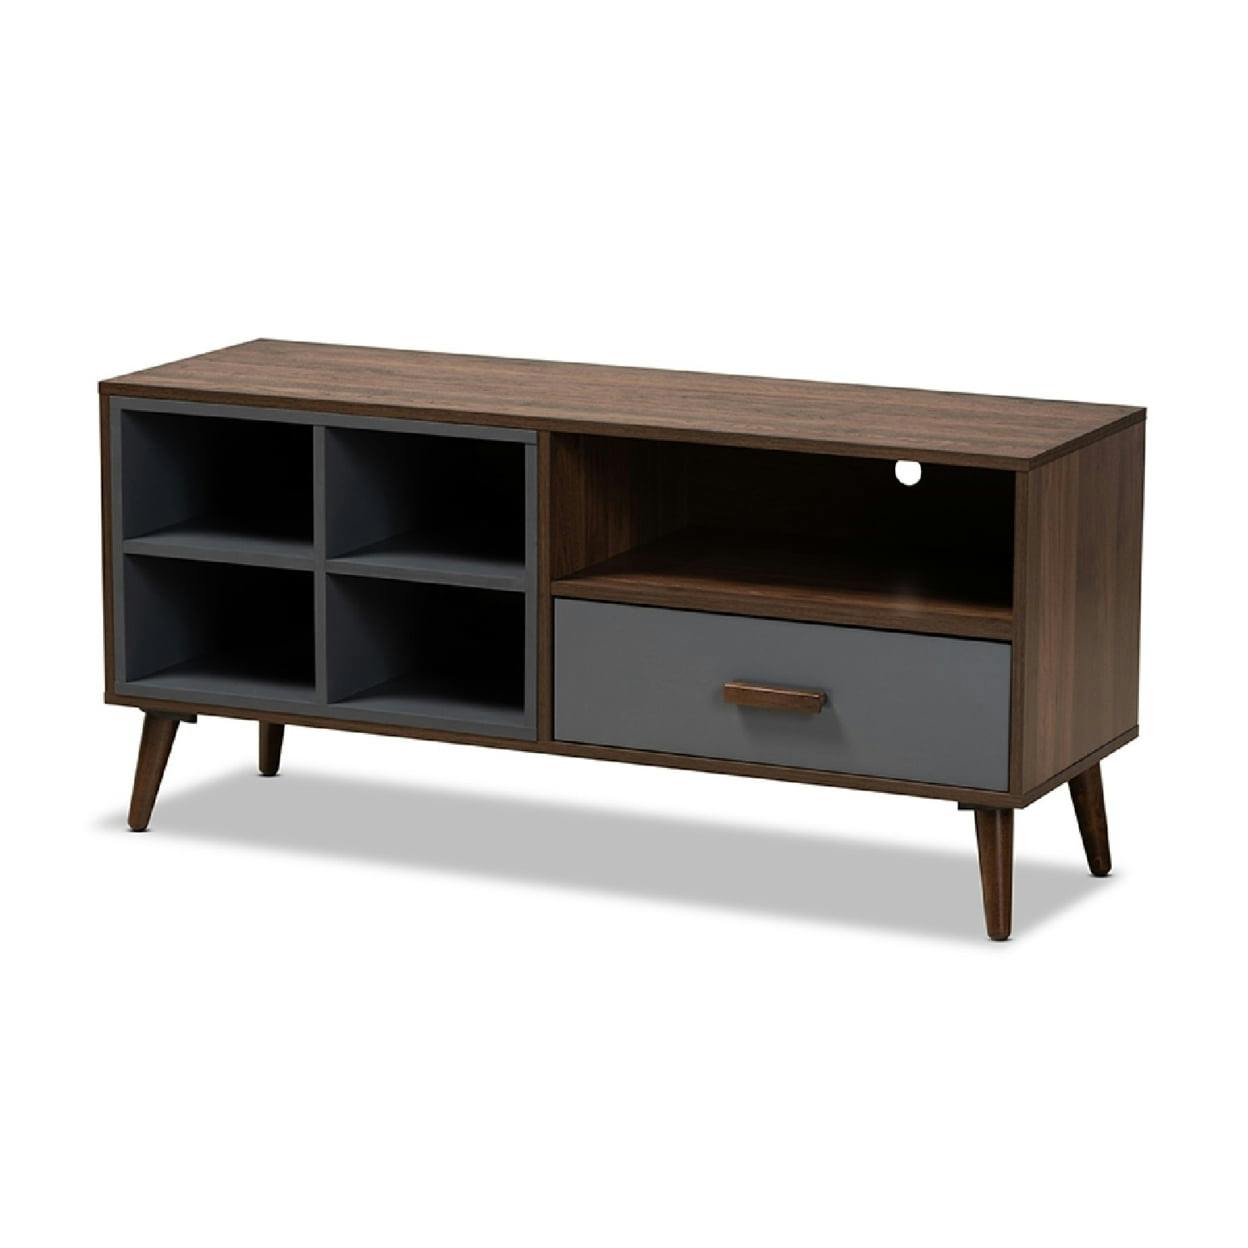 Garrick Two-Tone Grey and Walnut Contemporary TV Stand with Storage